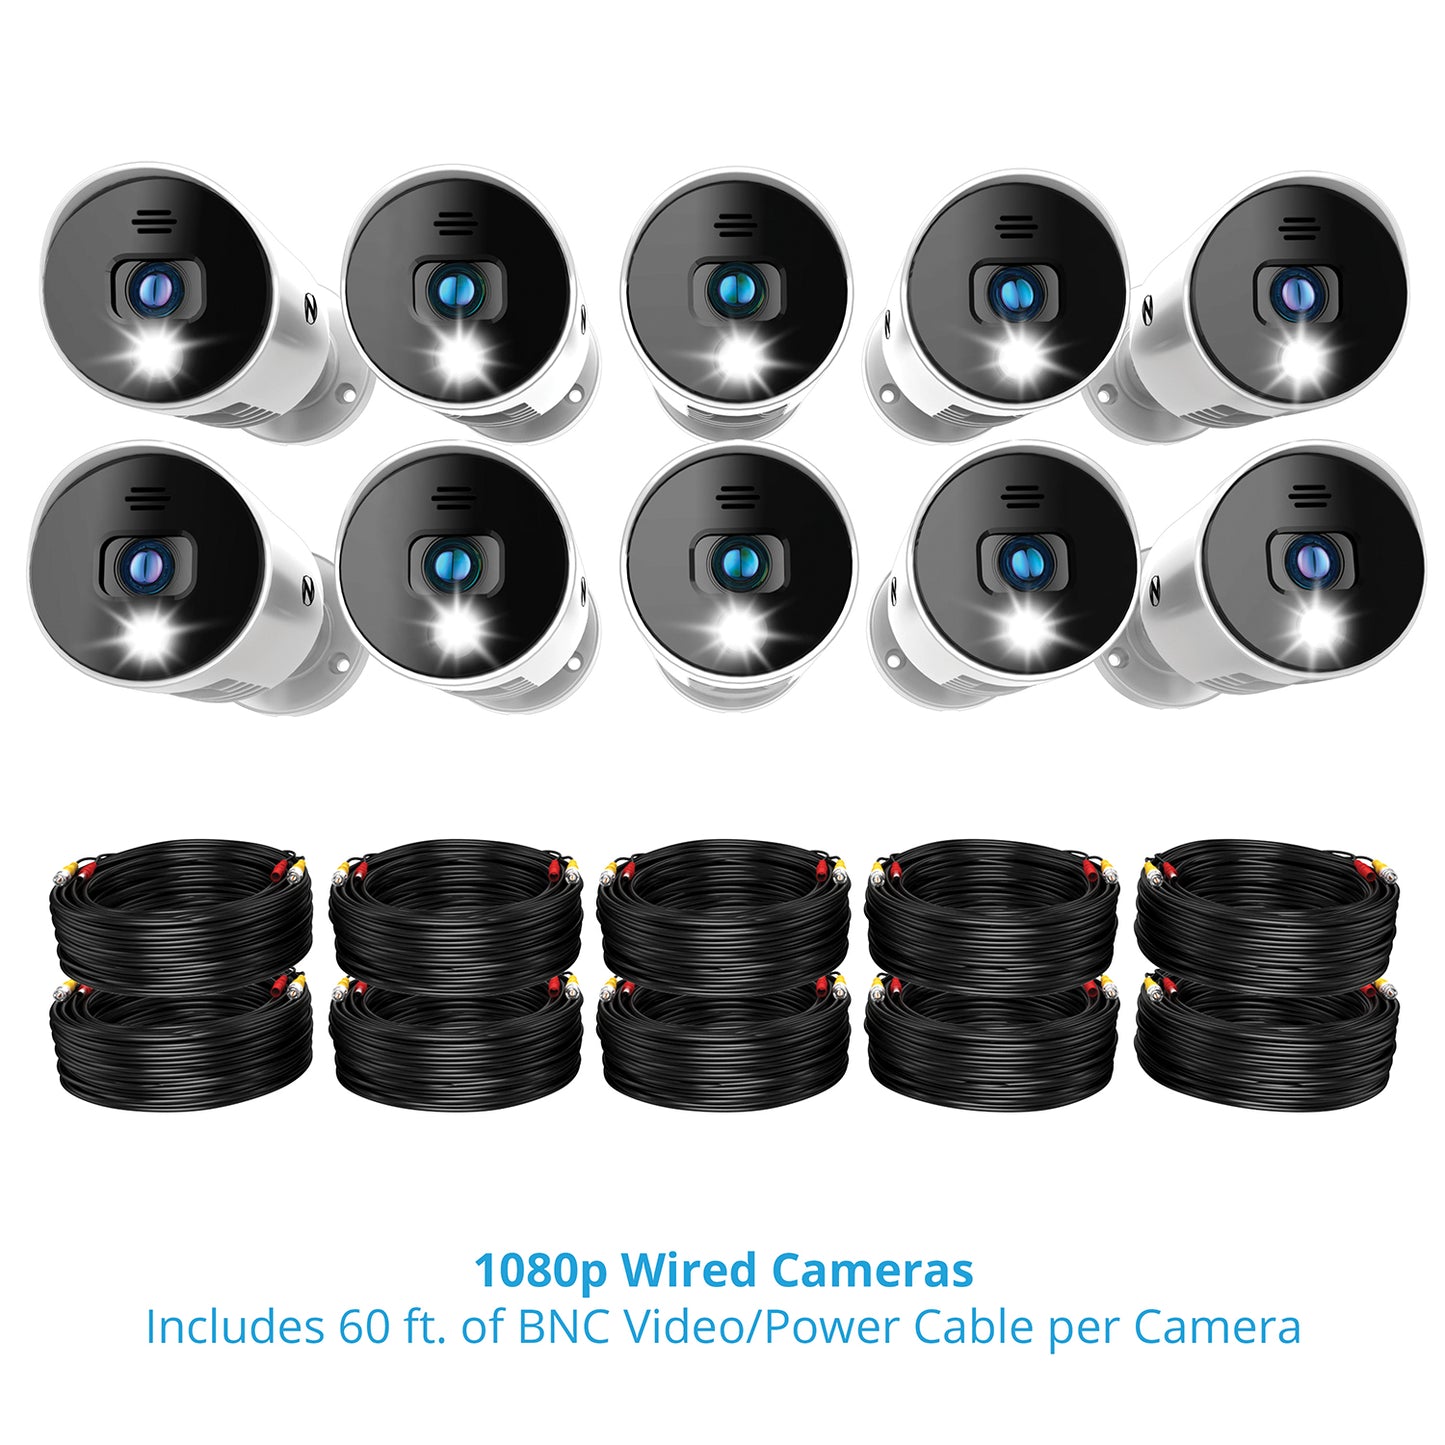 10 security cameras and 10 cables shown included with system